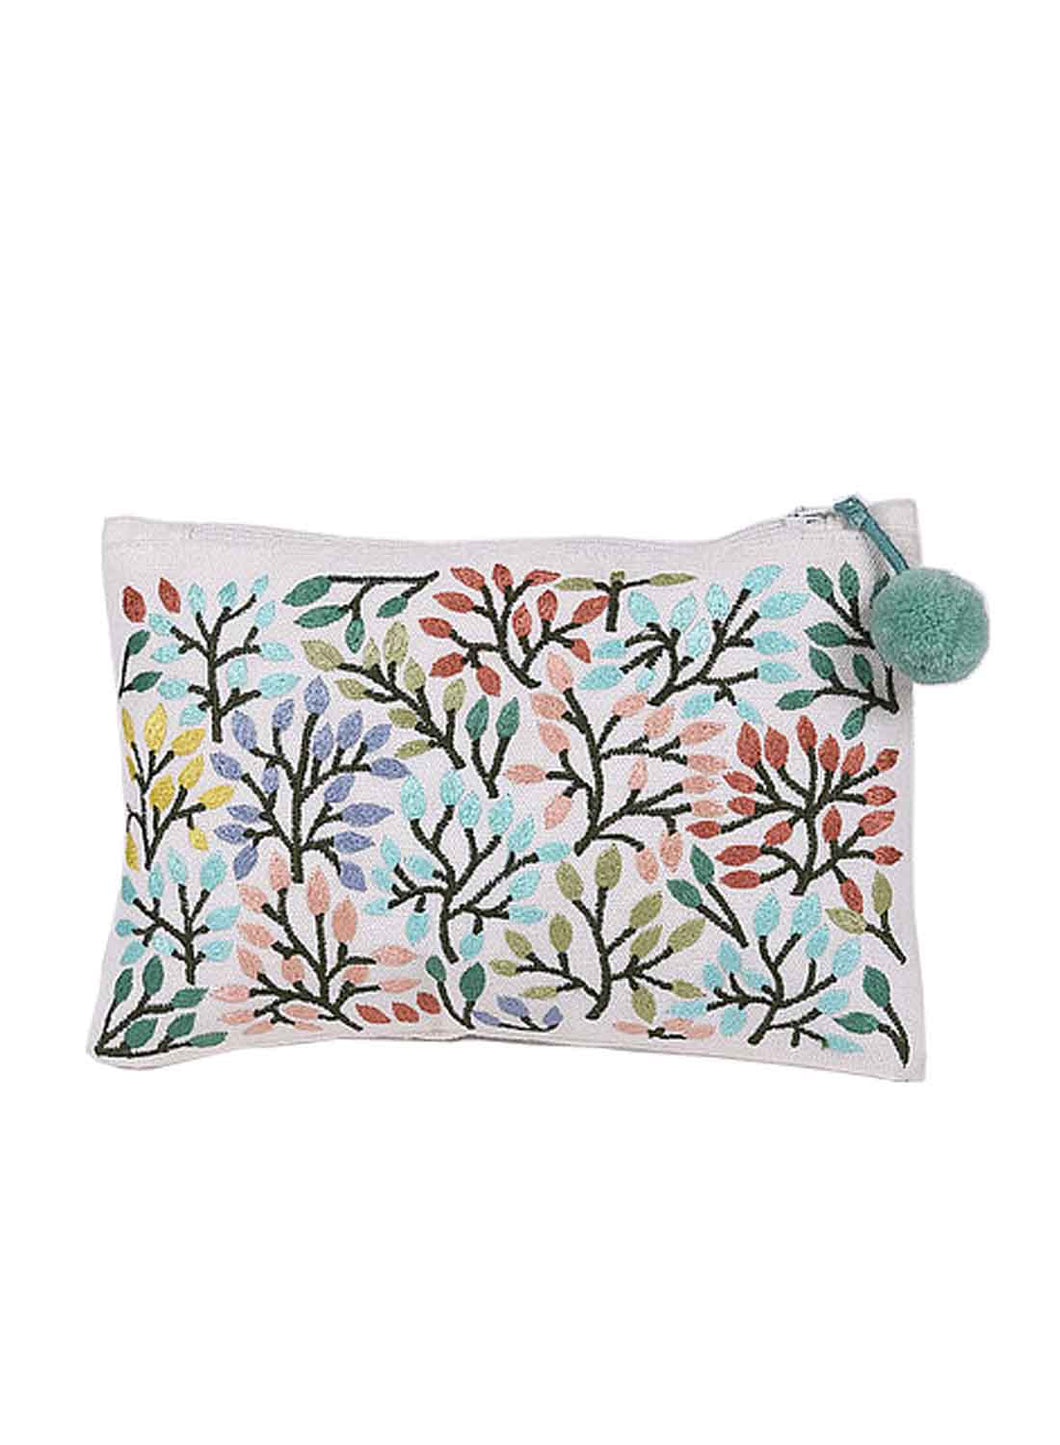 Kanyoga Spring Glow Embroidery Cotton Pouch With Pom Pom Attached For Women